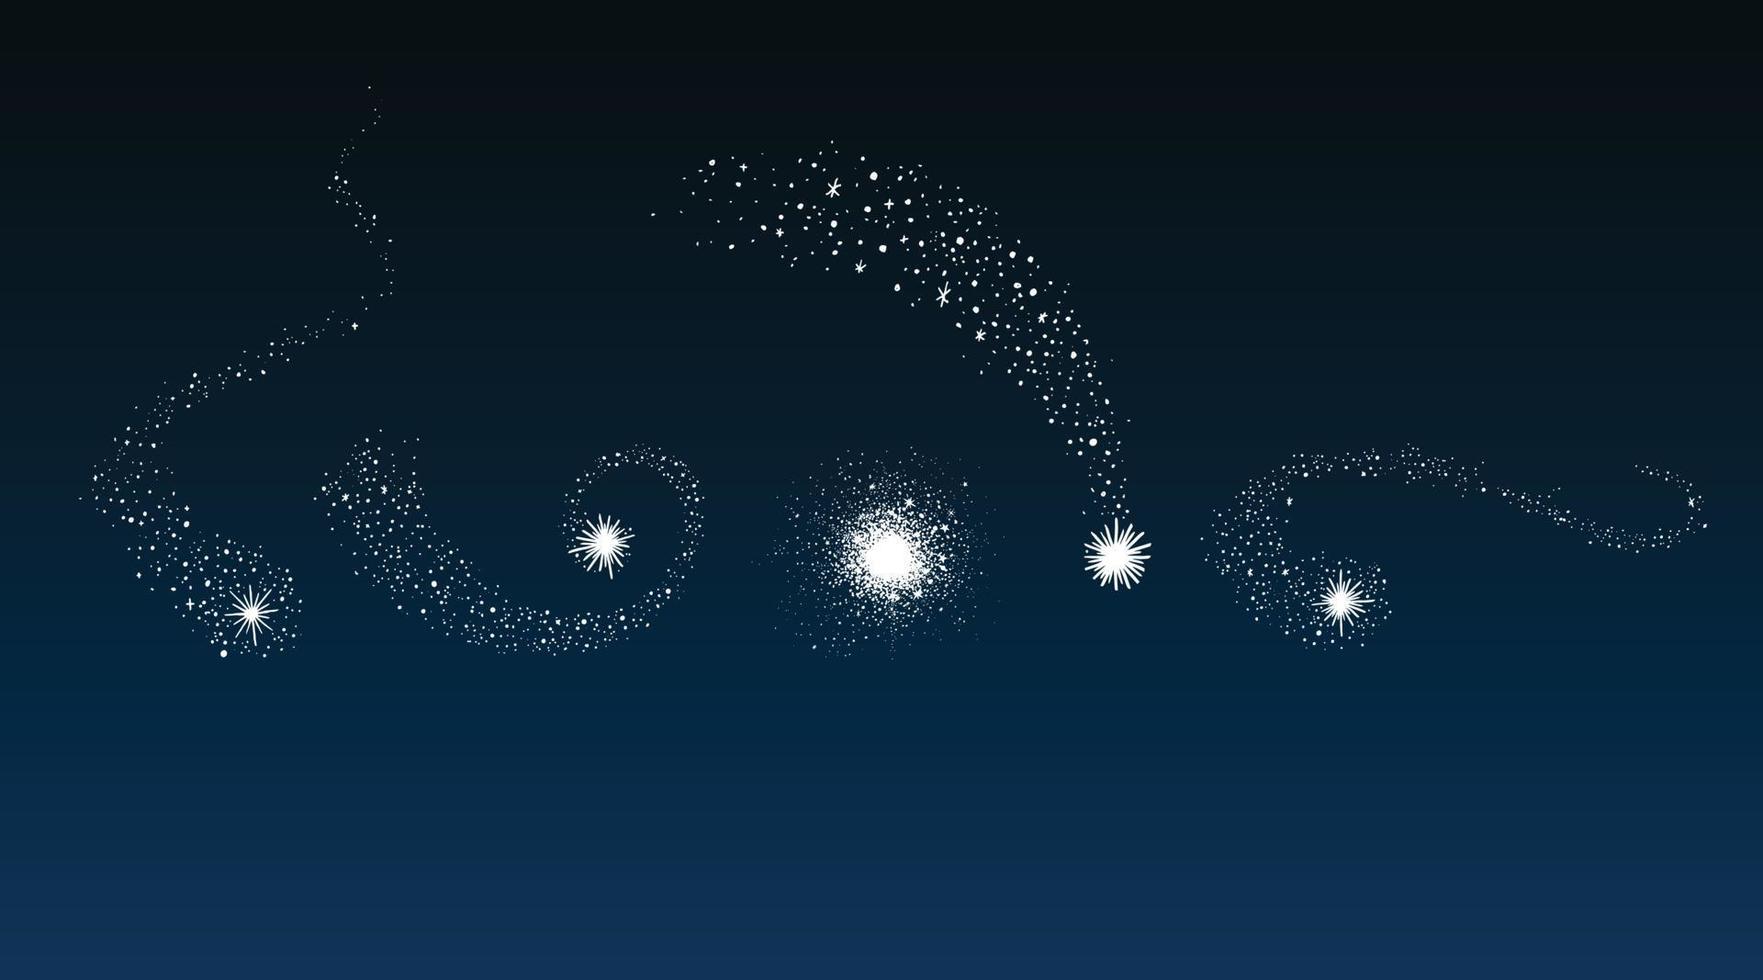 Vector illustration of shooting stars against the night sky background.